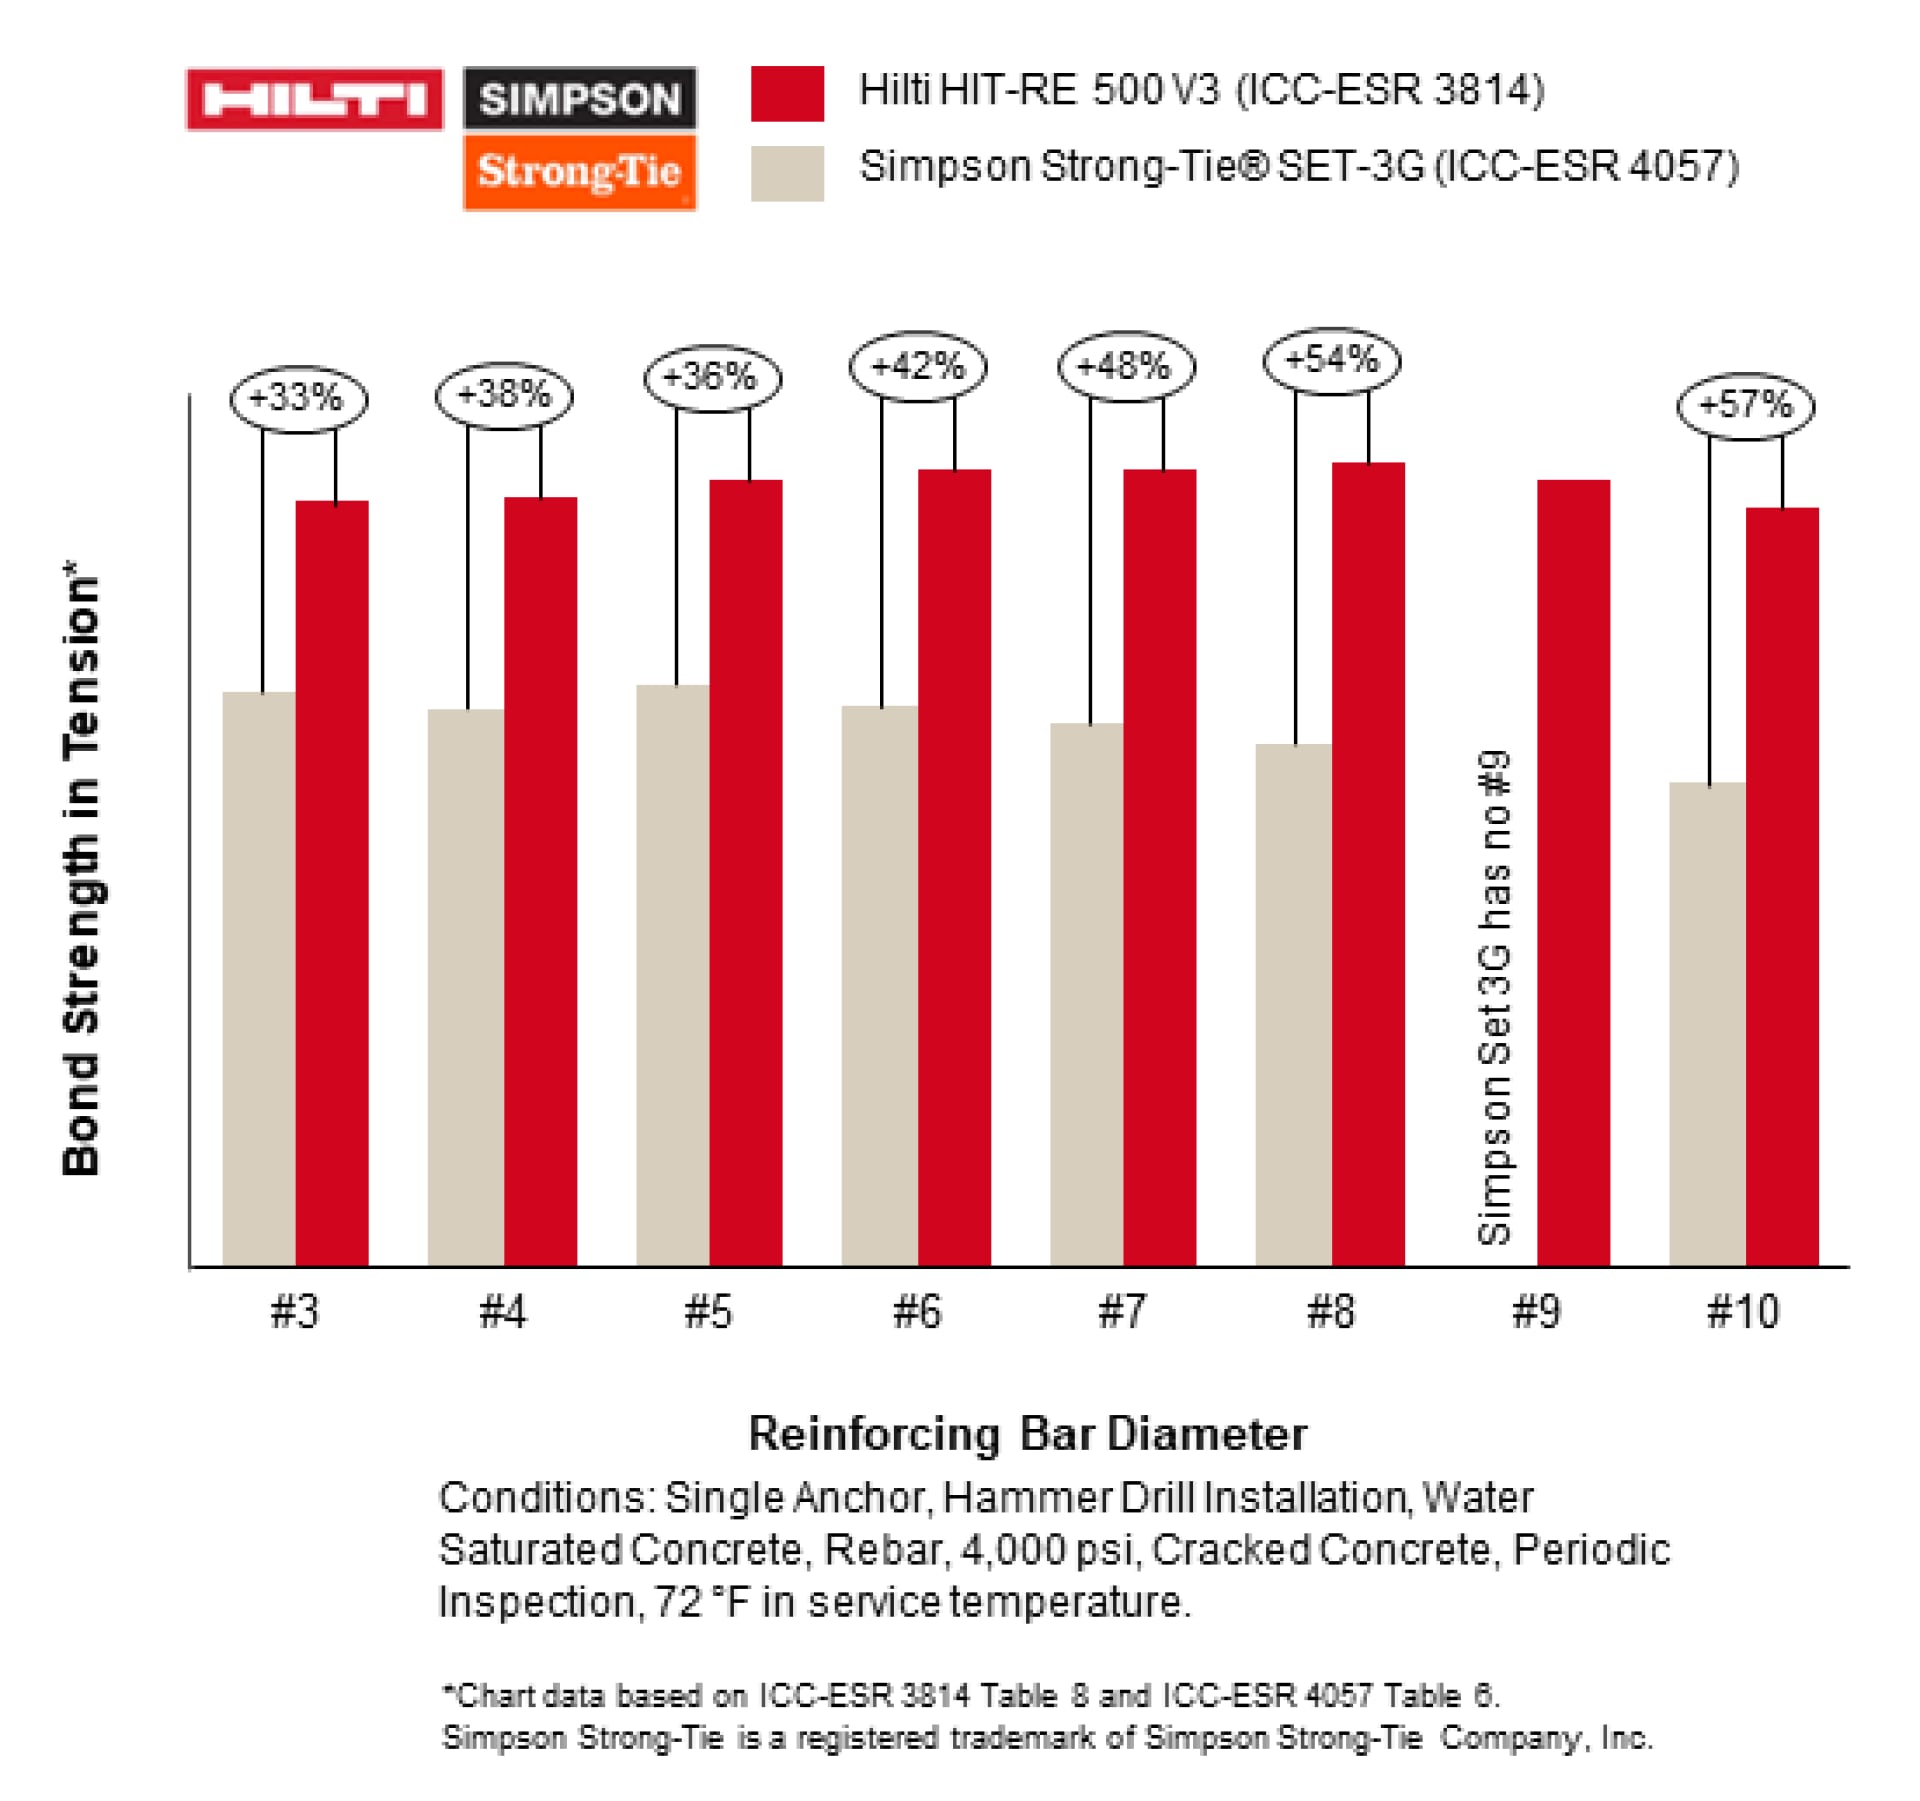 Bond Strength in Tension Competitive Performance: Hilti vs Simpson StrongTie Bond Strength in Tension load x reinforcing bar diameter comparison chart for Water Saturated conditions; Hilti HIT-RE 500 v3; Simpson Set 3G; #3 +33%; #4 +38%; #5 +36%; #6 +46%; #7 +48%; #8 +54%; #9 Simpson Set 3G has no #9; #10 +57%; conditions single anchor, hammer drill installation, water saturated concrete, 4000psi, cracked concrete Periodic Inspection, 72 °F in service temperature. Chart data based on ICC-ESR 3814 Table 8 and ICC-ESR 4057 Table 6. Simpson Strong-Tie is a registered trademark of Simpson Strong-Tie Company, Inc